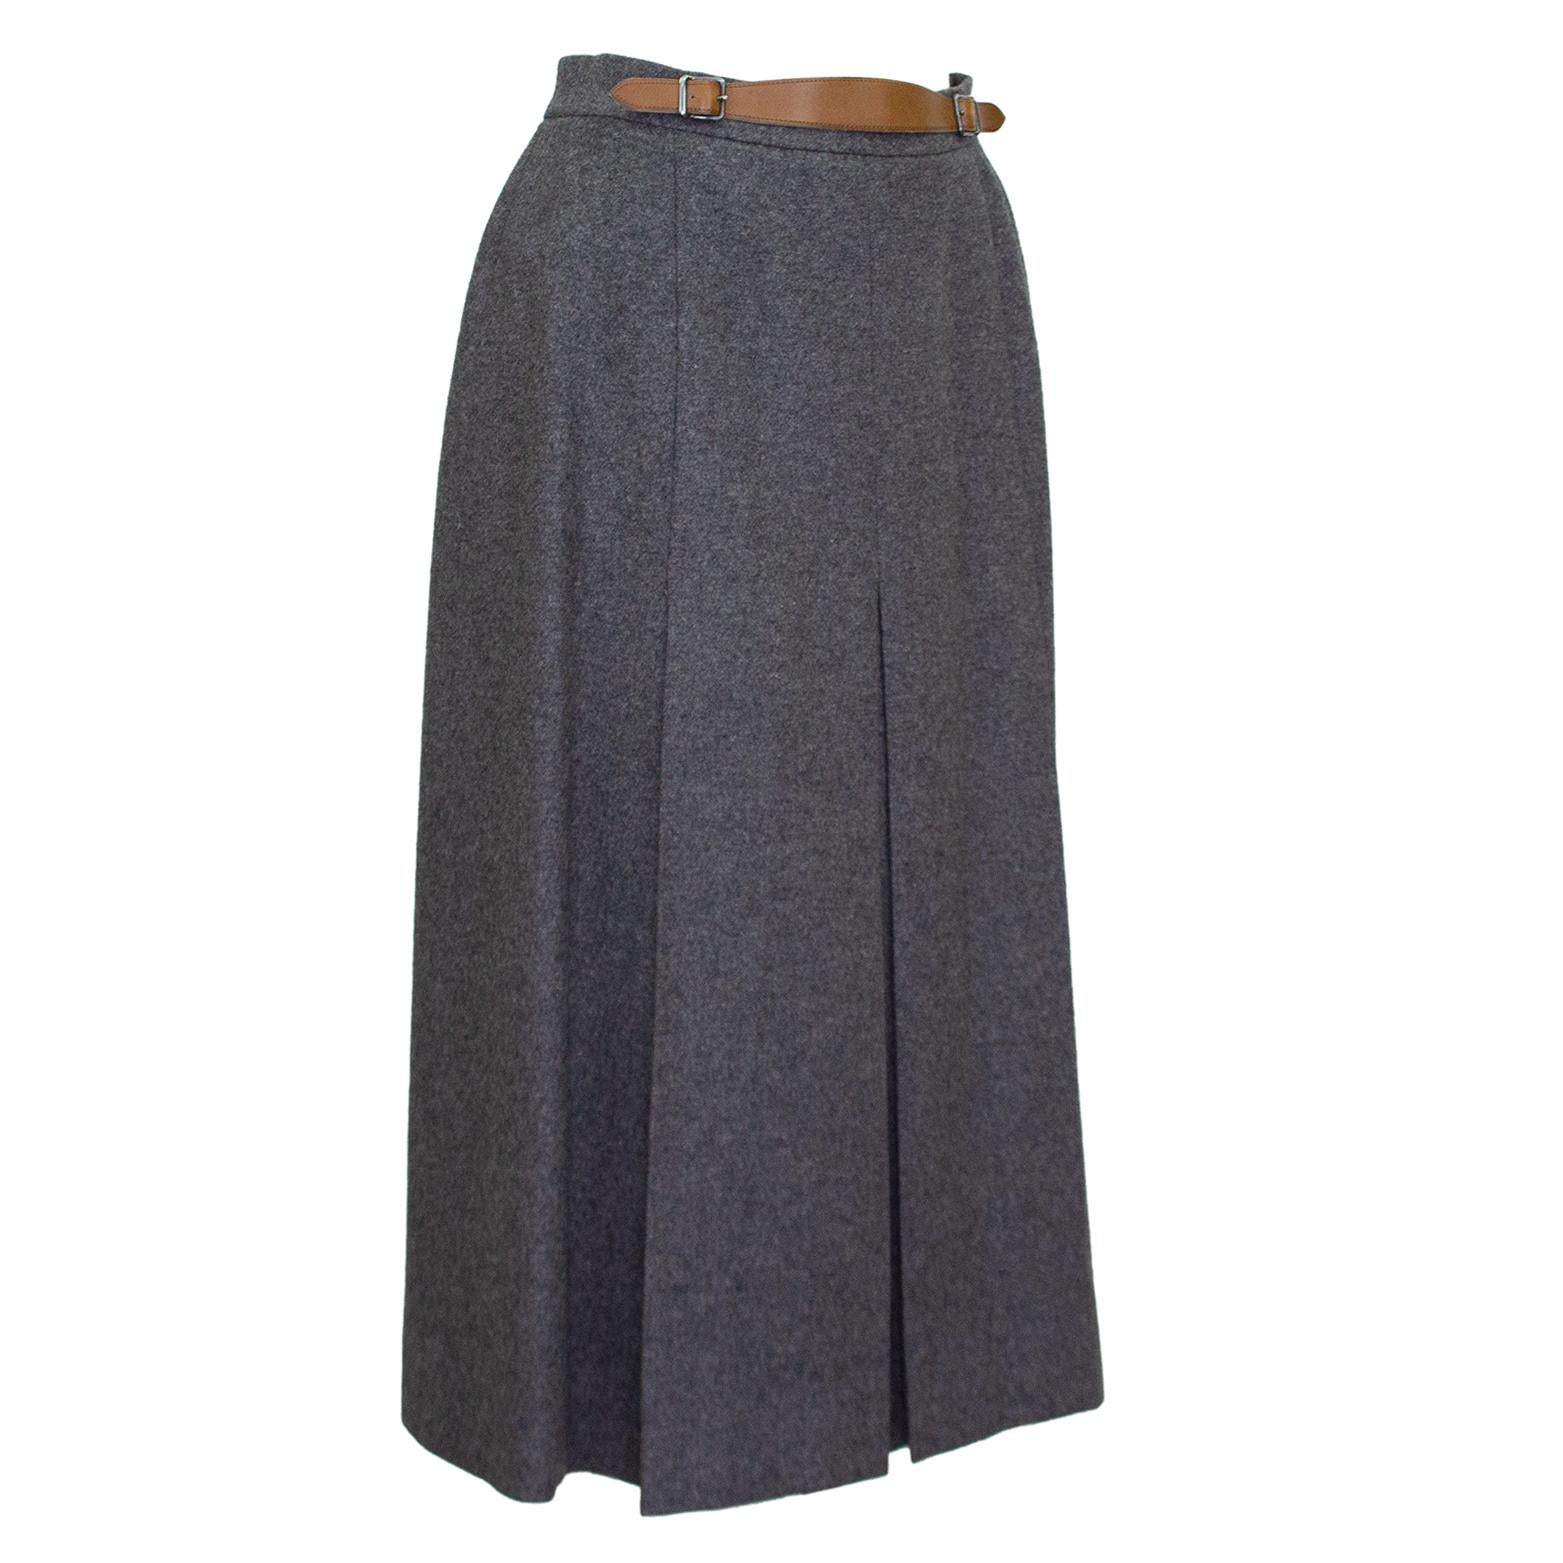 1980s Hermes grey wool skirt. High waisted with slight a-line shape with centre inverted box pleat. Tan leather detail at waist with tonal top stitching and silver metal buckles. Midi length. Side zipper with hook and eye. Excellent vintage